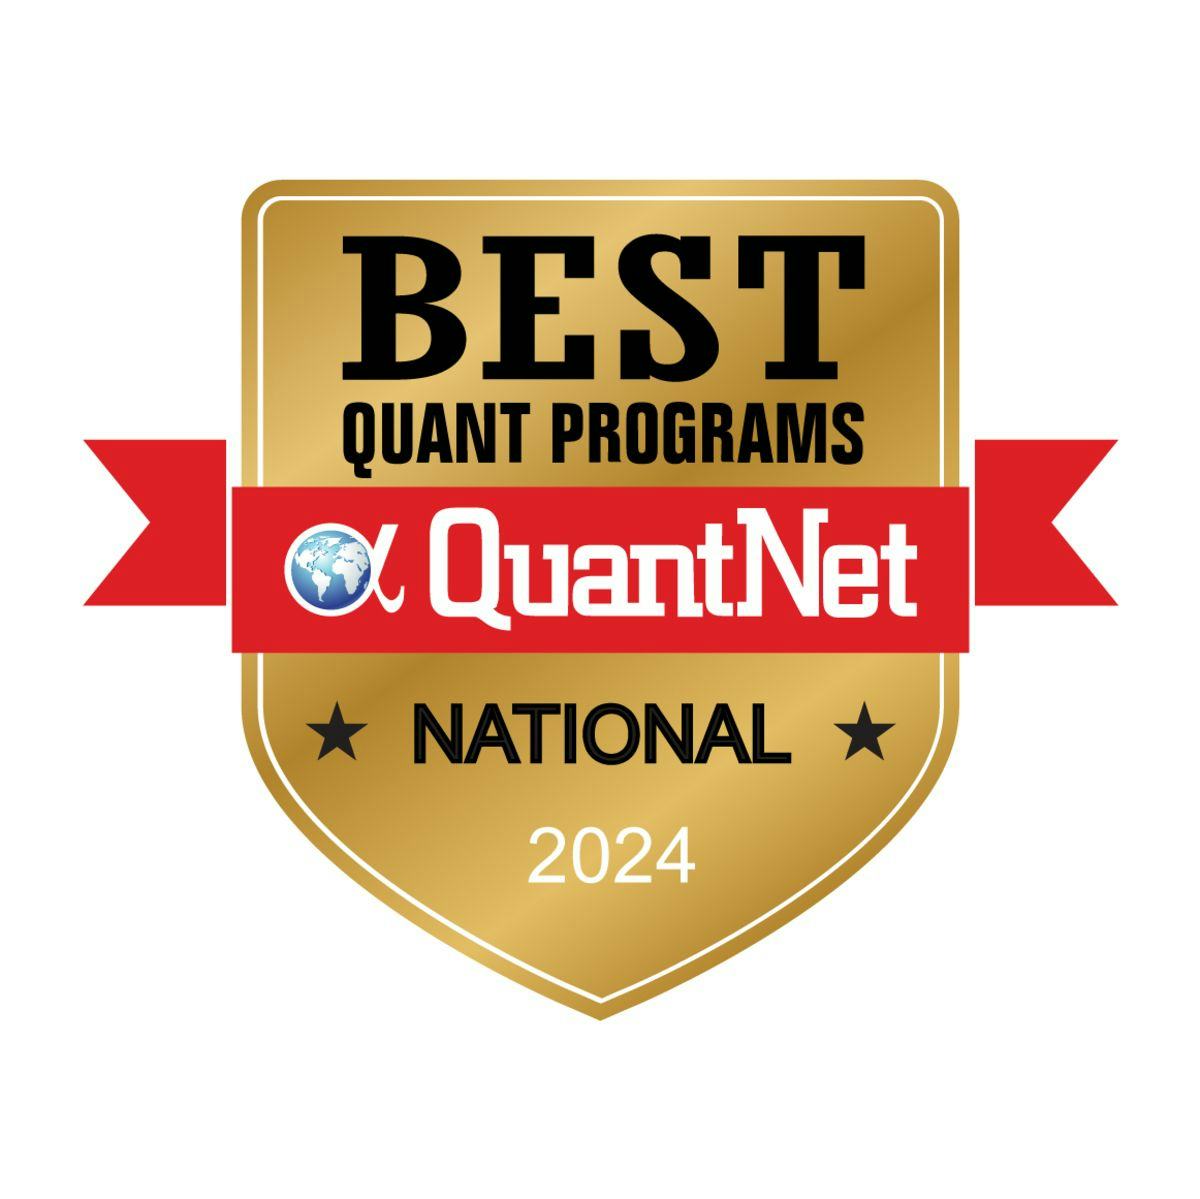 Top rated by Quantnet